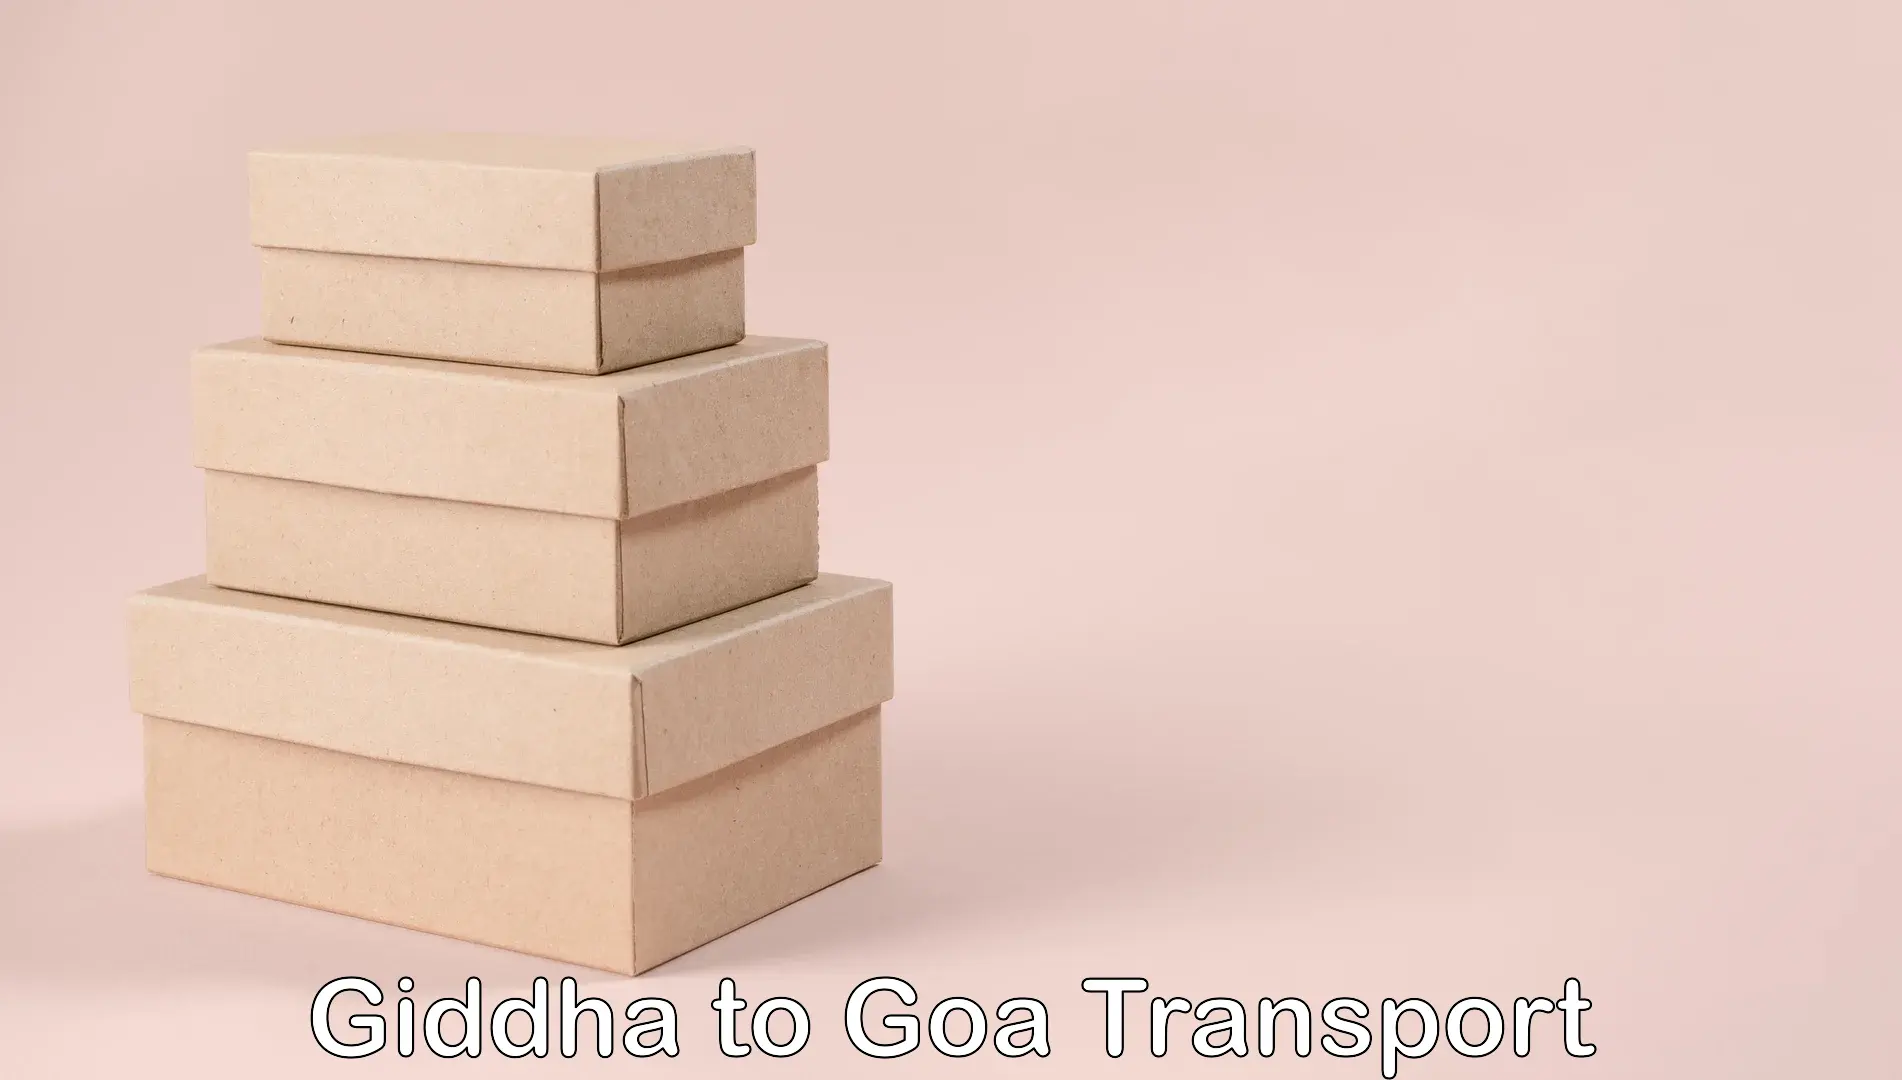 Part load transport service in India Giddha to Goa